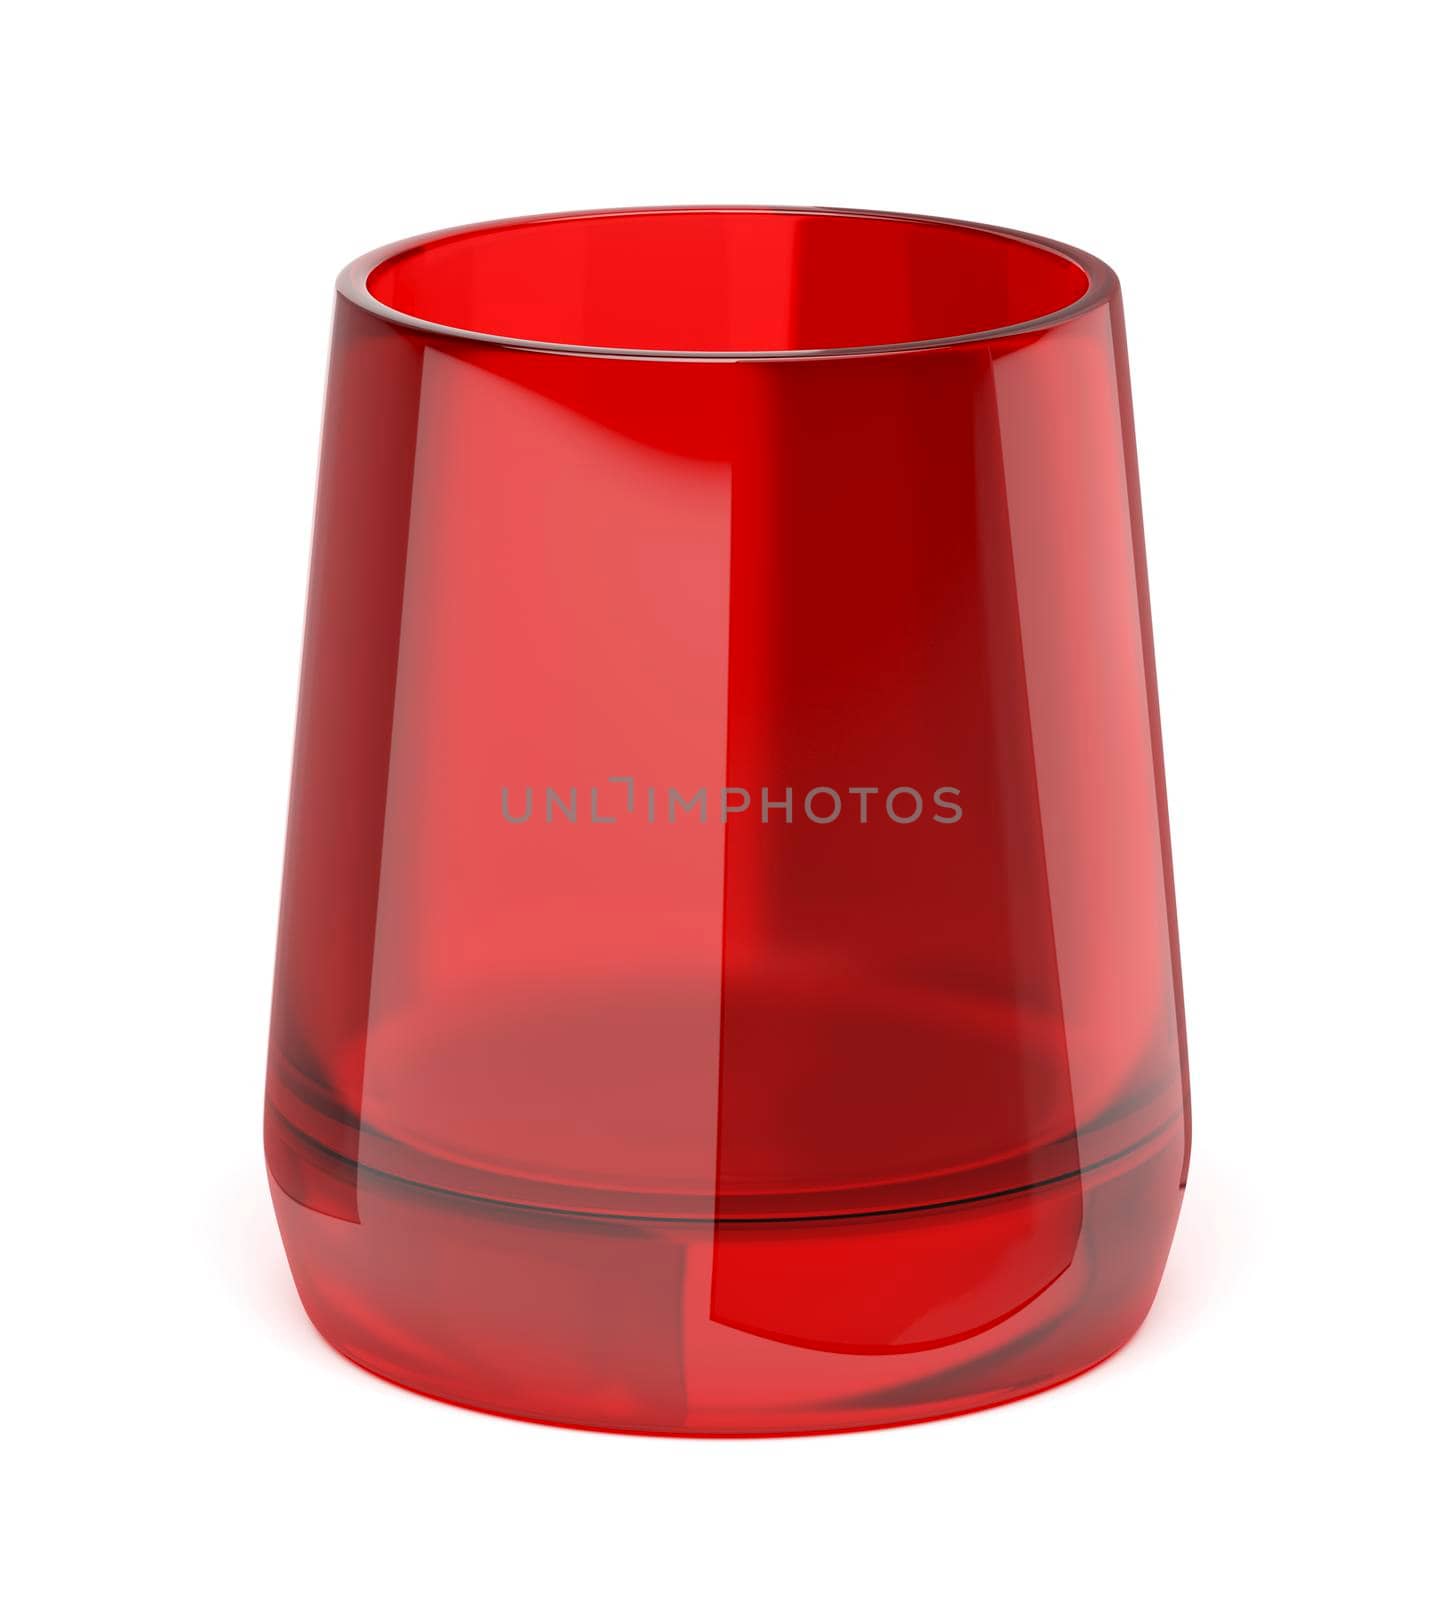 Empty red glass for water, liqueur, vodka or other alcoholic drink isolated on white background